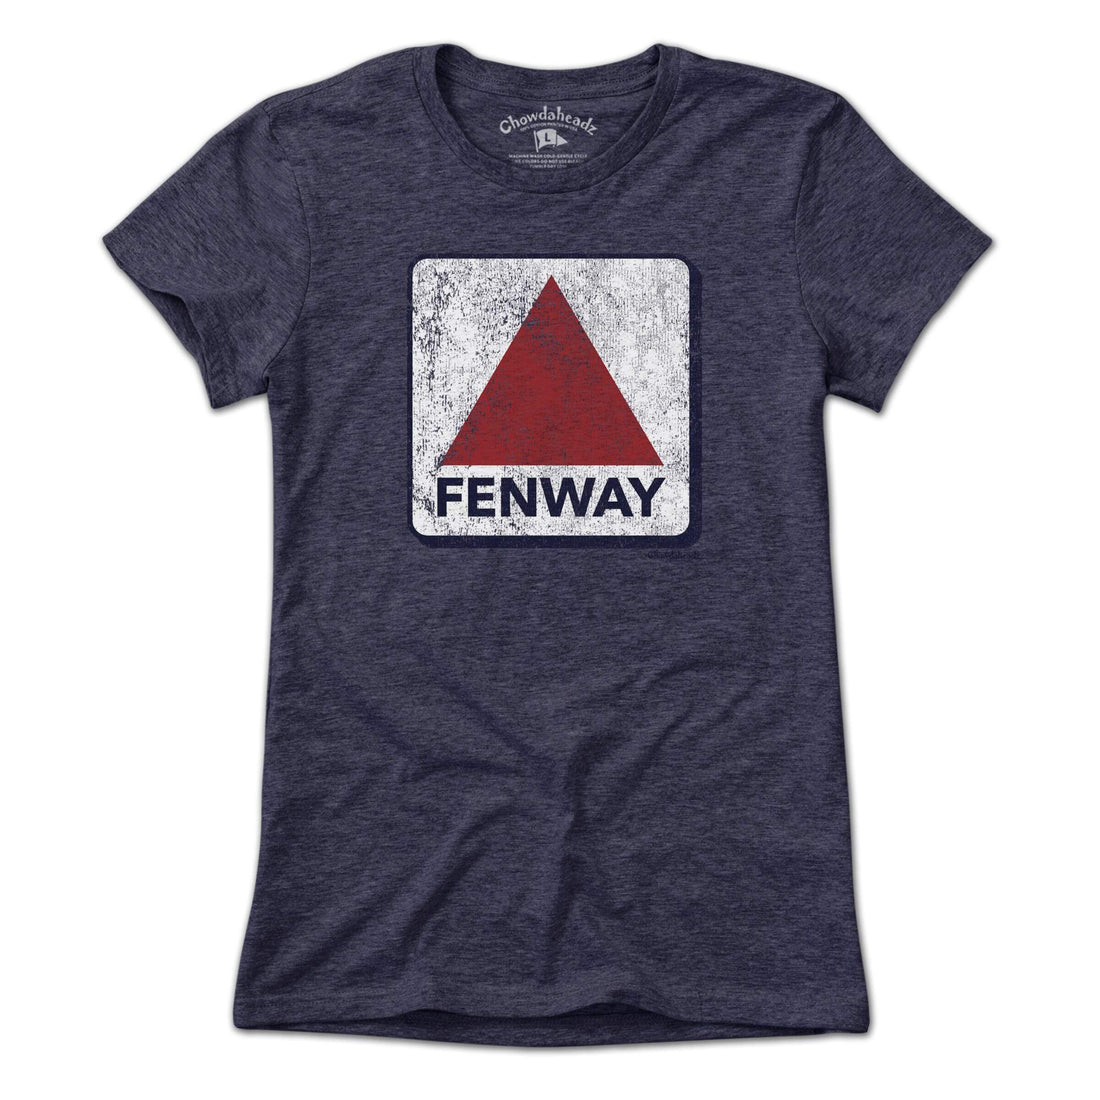 I Might Not Live In Boston But I Keep My Sox In Fenway Park Shirt - Limotees